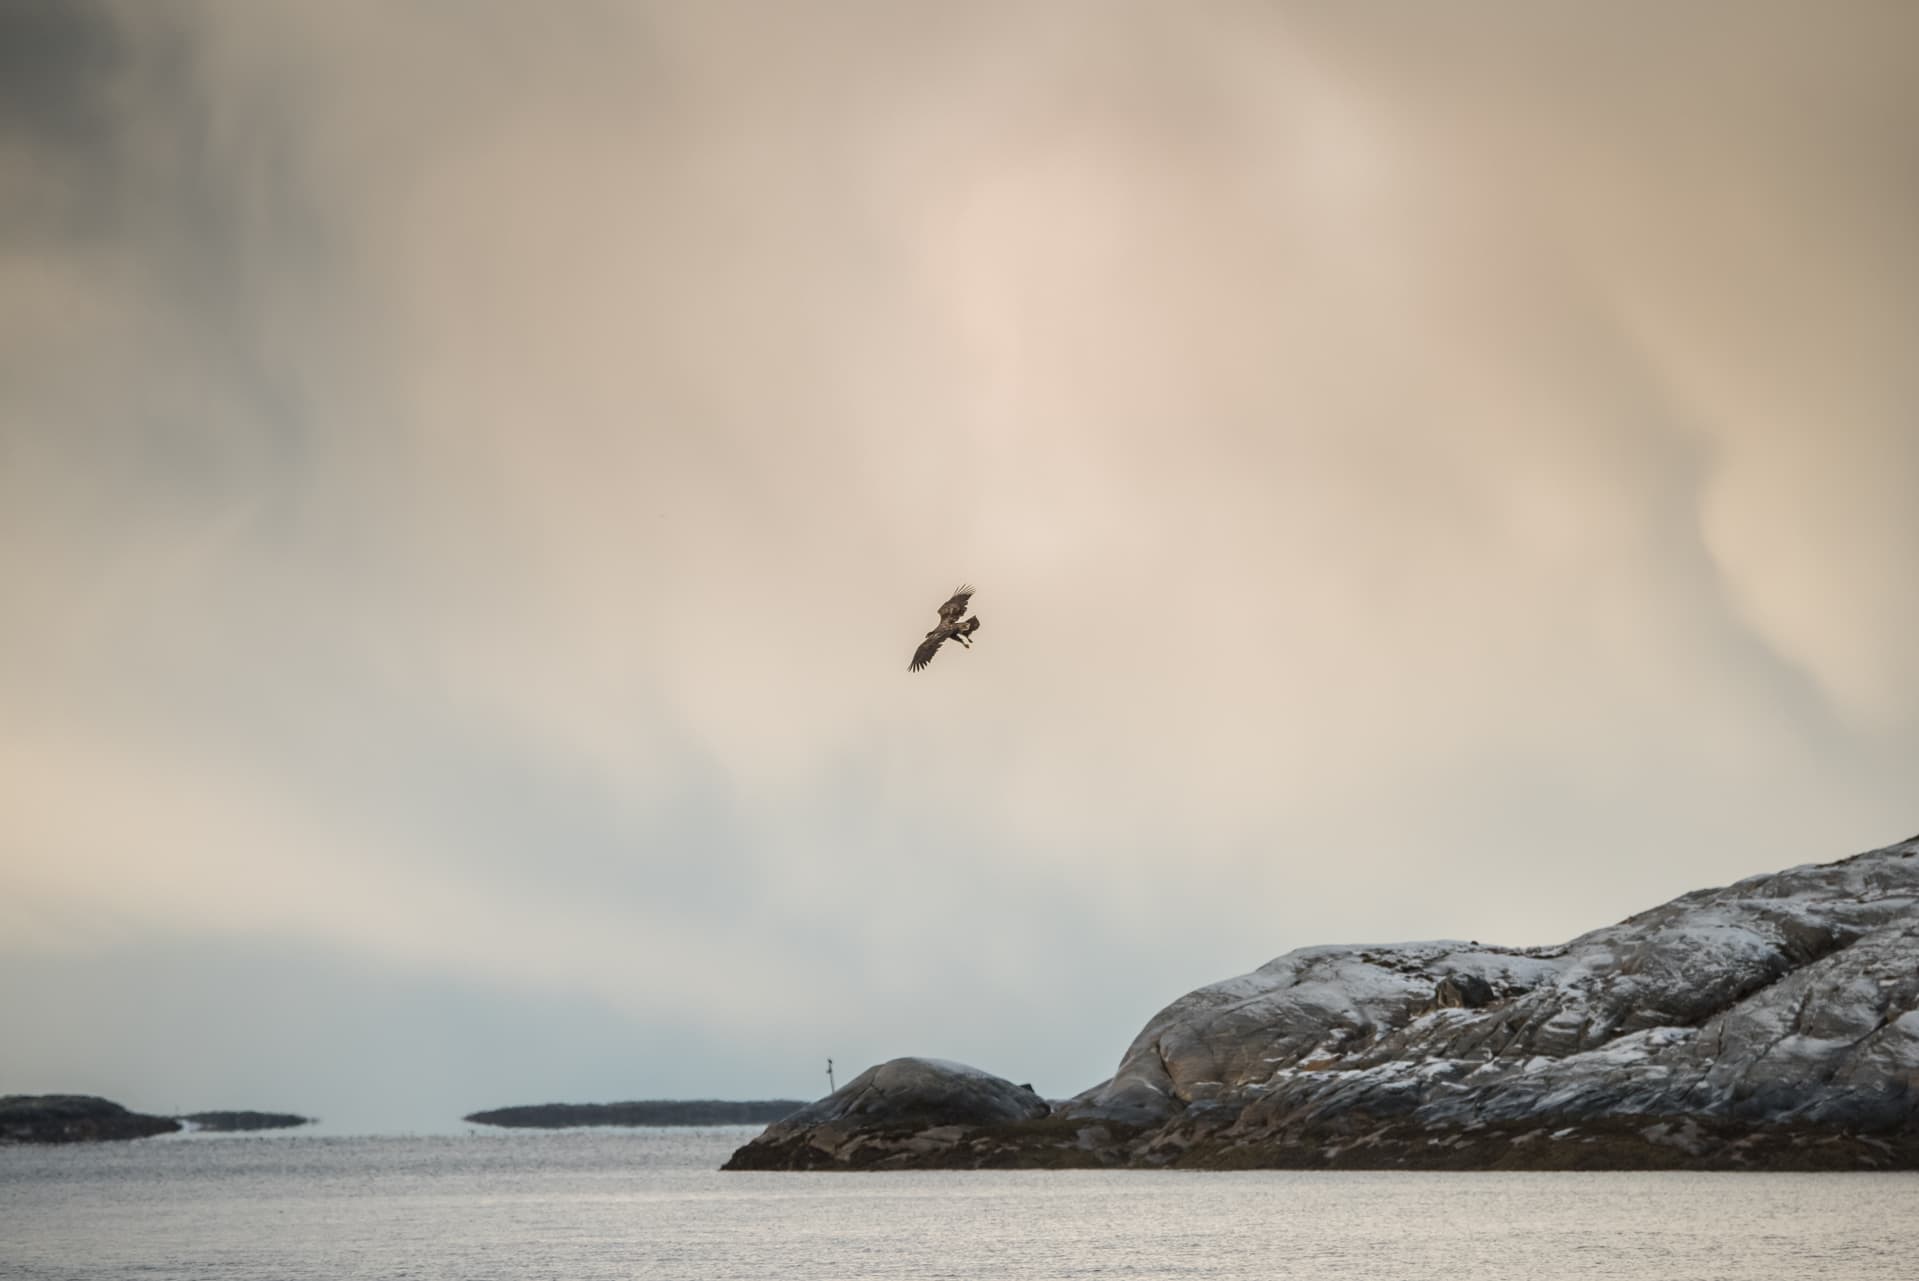 A lone White-tailed Eagle over the stark coastline of Flatanger - one of the species photographed during the Winter Eagles of Norway photography holiday